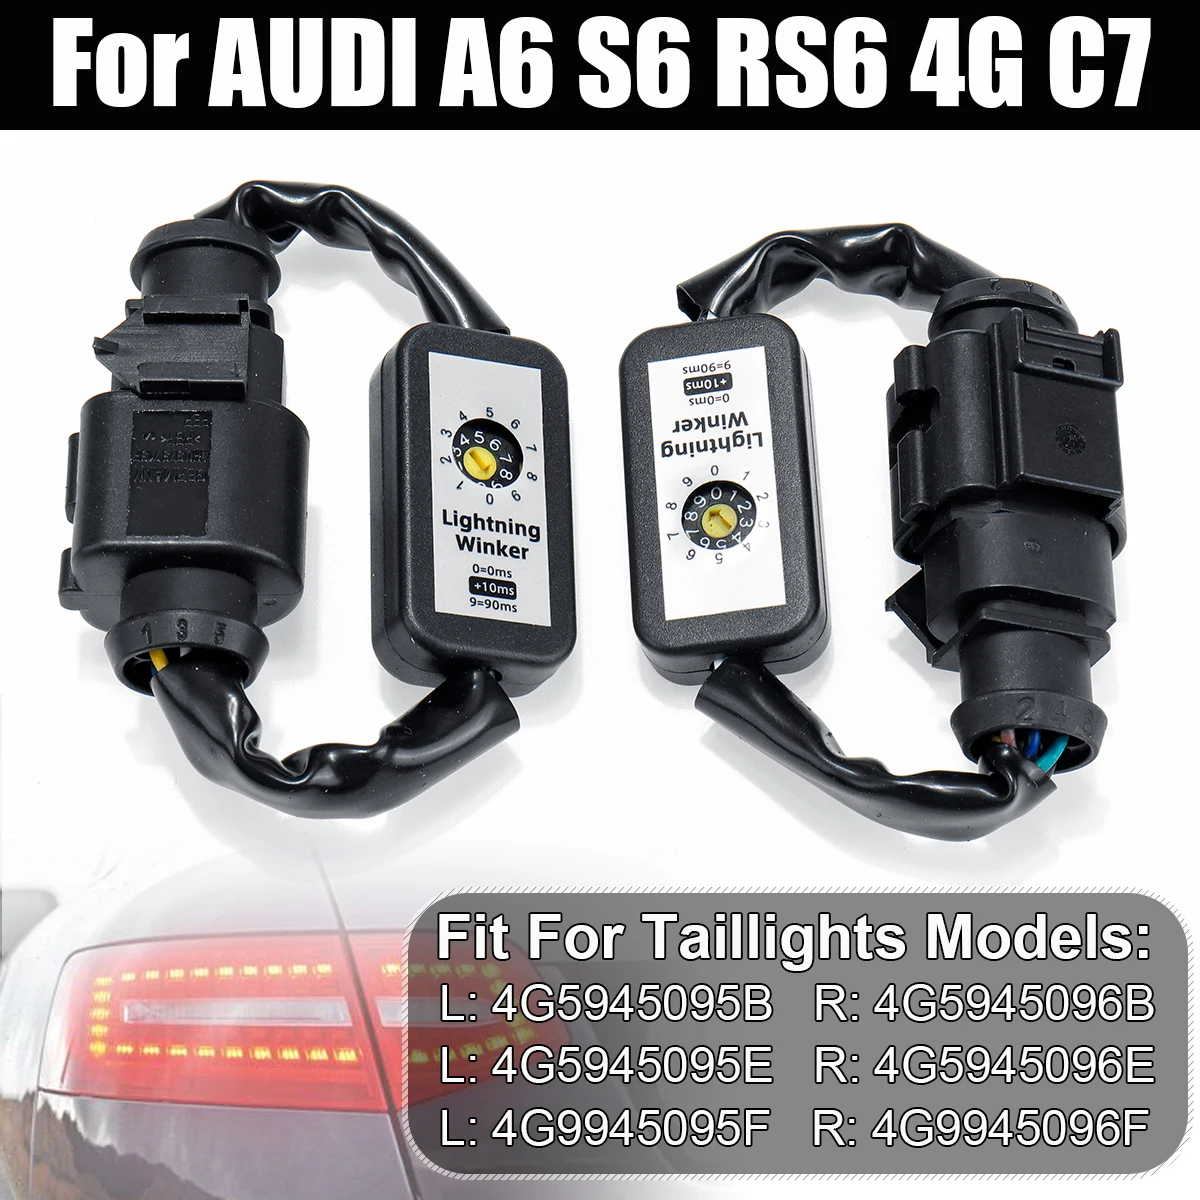 2pcs Dynamic Turn Signal Indicator Led Taillight Add On Module Cable Wire Harness For Audi A6 S6 Rs6 4g C7 Left Right Tail Light Cables Adapters Sockets Aliexpress